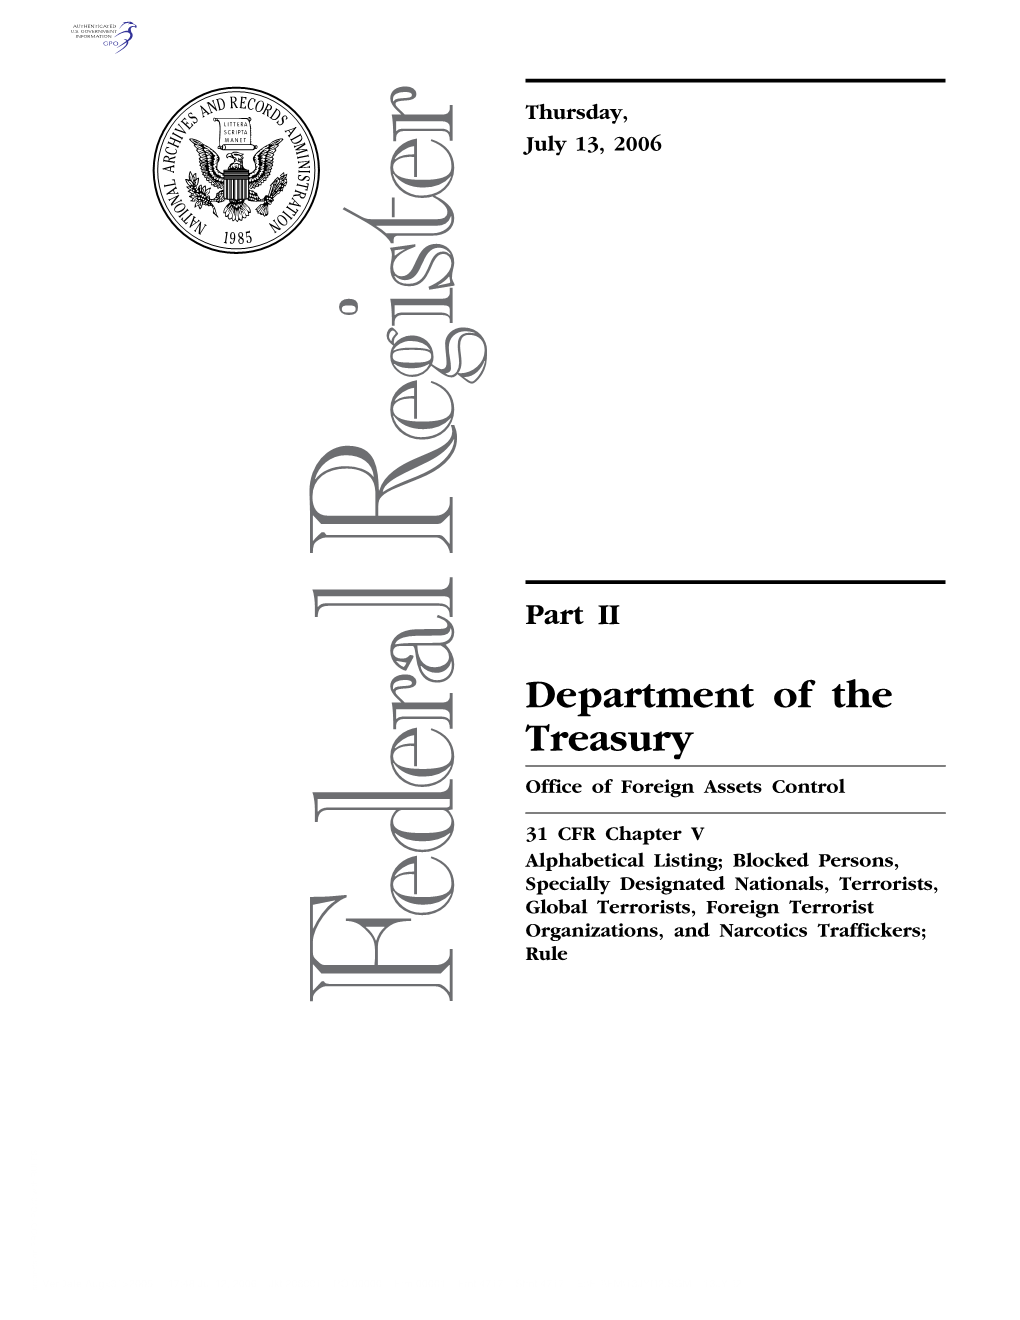 Department of the Treasury Office of Foreign Assets Control